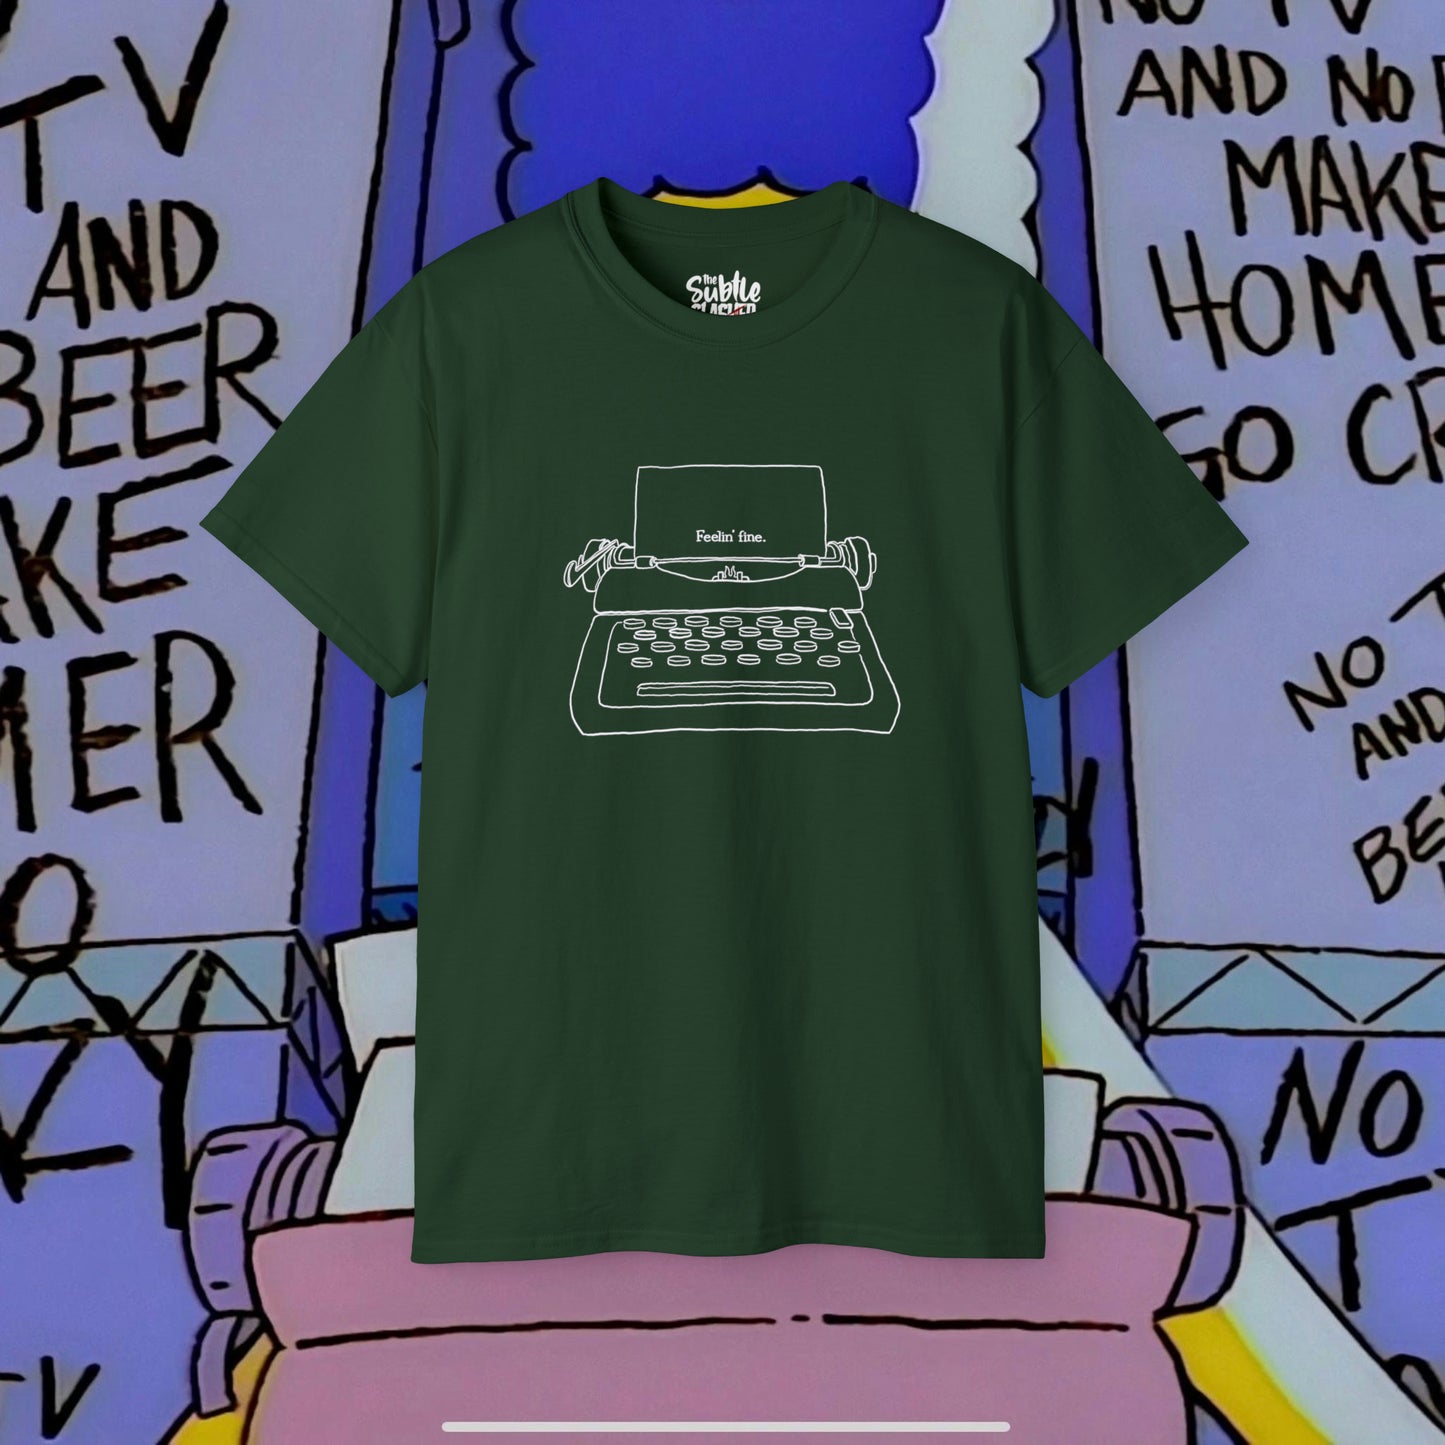 Window To His Madness Tee